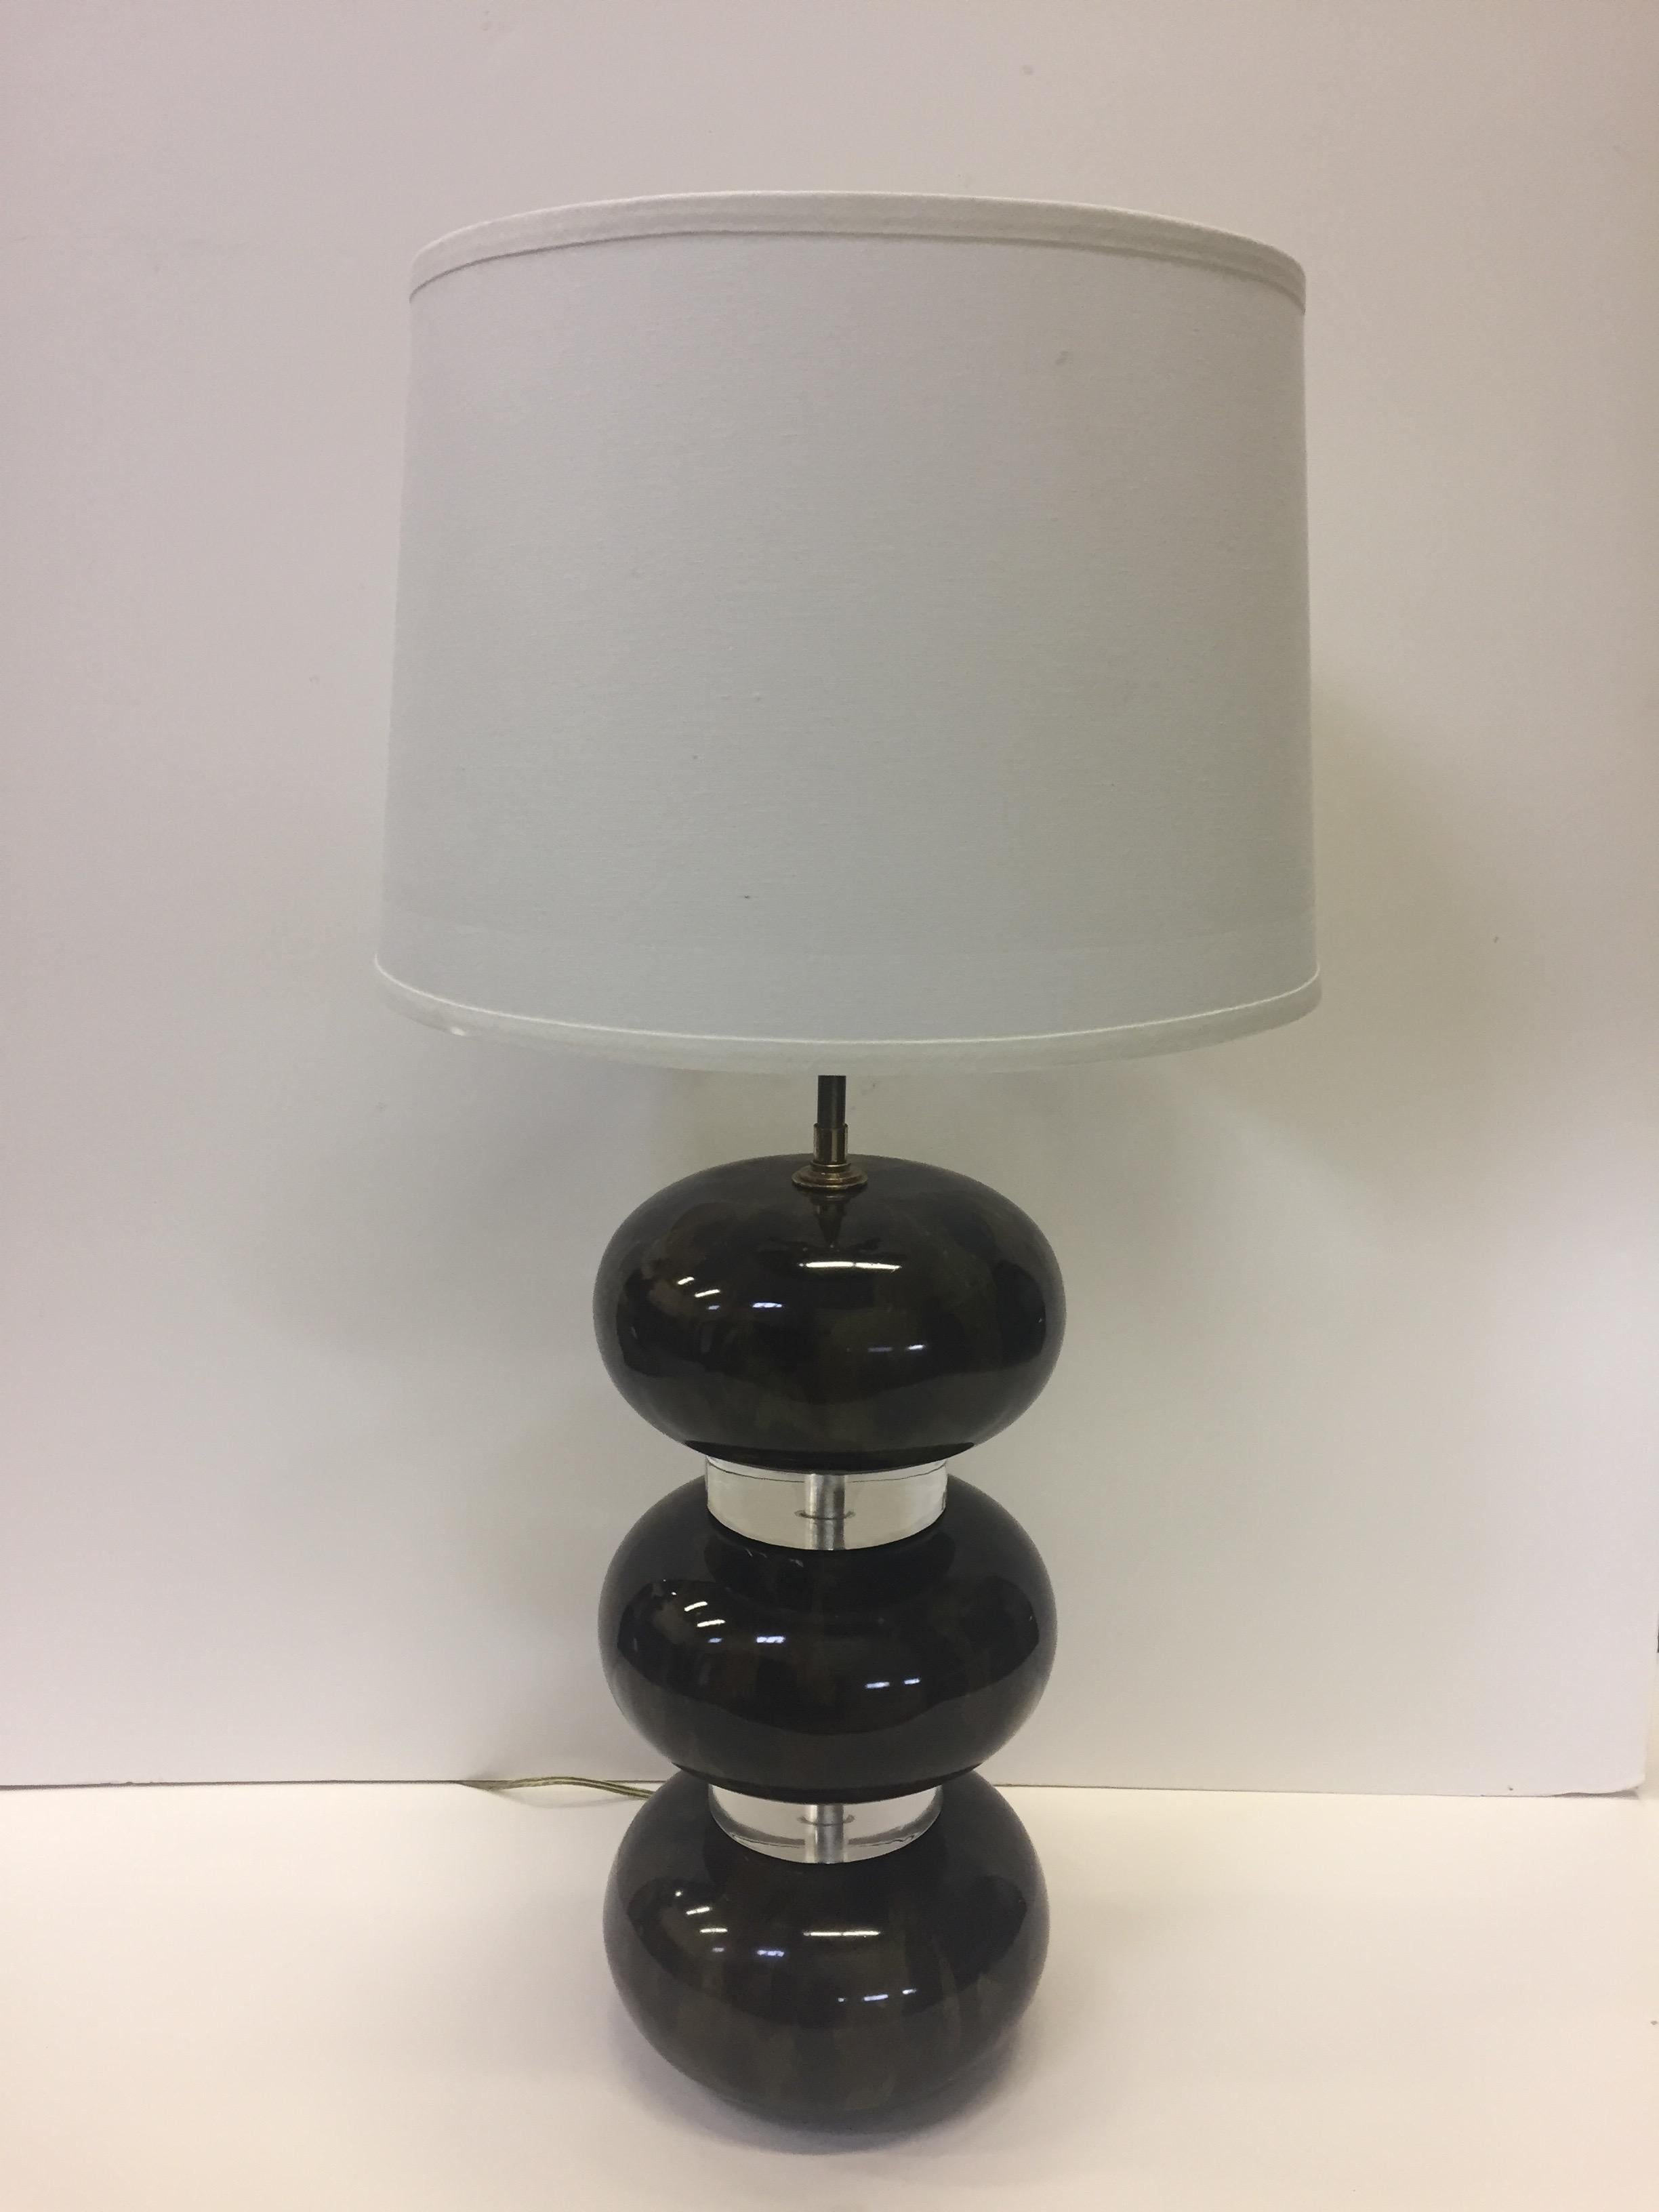 Karl Springer Mid-Century Modern eye-catching lamp having stacked lacquered wooden discs that look like tortoiseshell, with cool Lucite cylinders in between. Chrome hardware. The height measures to the hardware not to the shade as shade is not